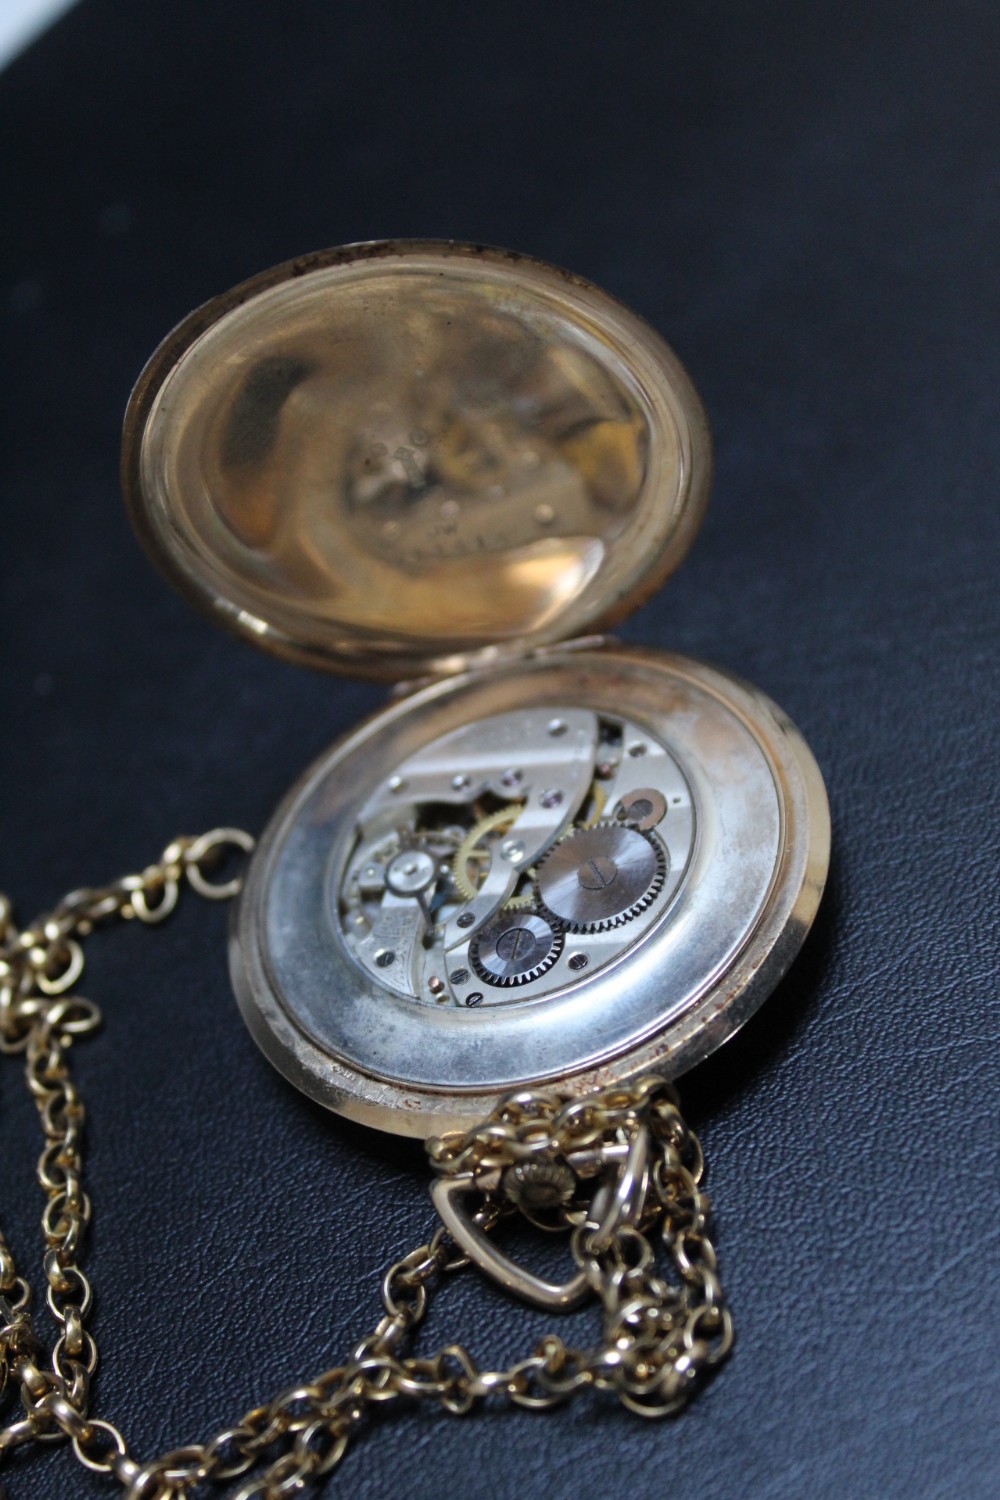 A HALLMARKED 9 CARAT GOLD OPEN FACED MANUAL WIND POCKET WATCH, on hallmarked 9 carat gold chain, - Image 3 of 3